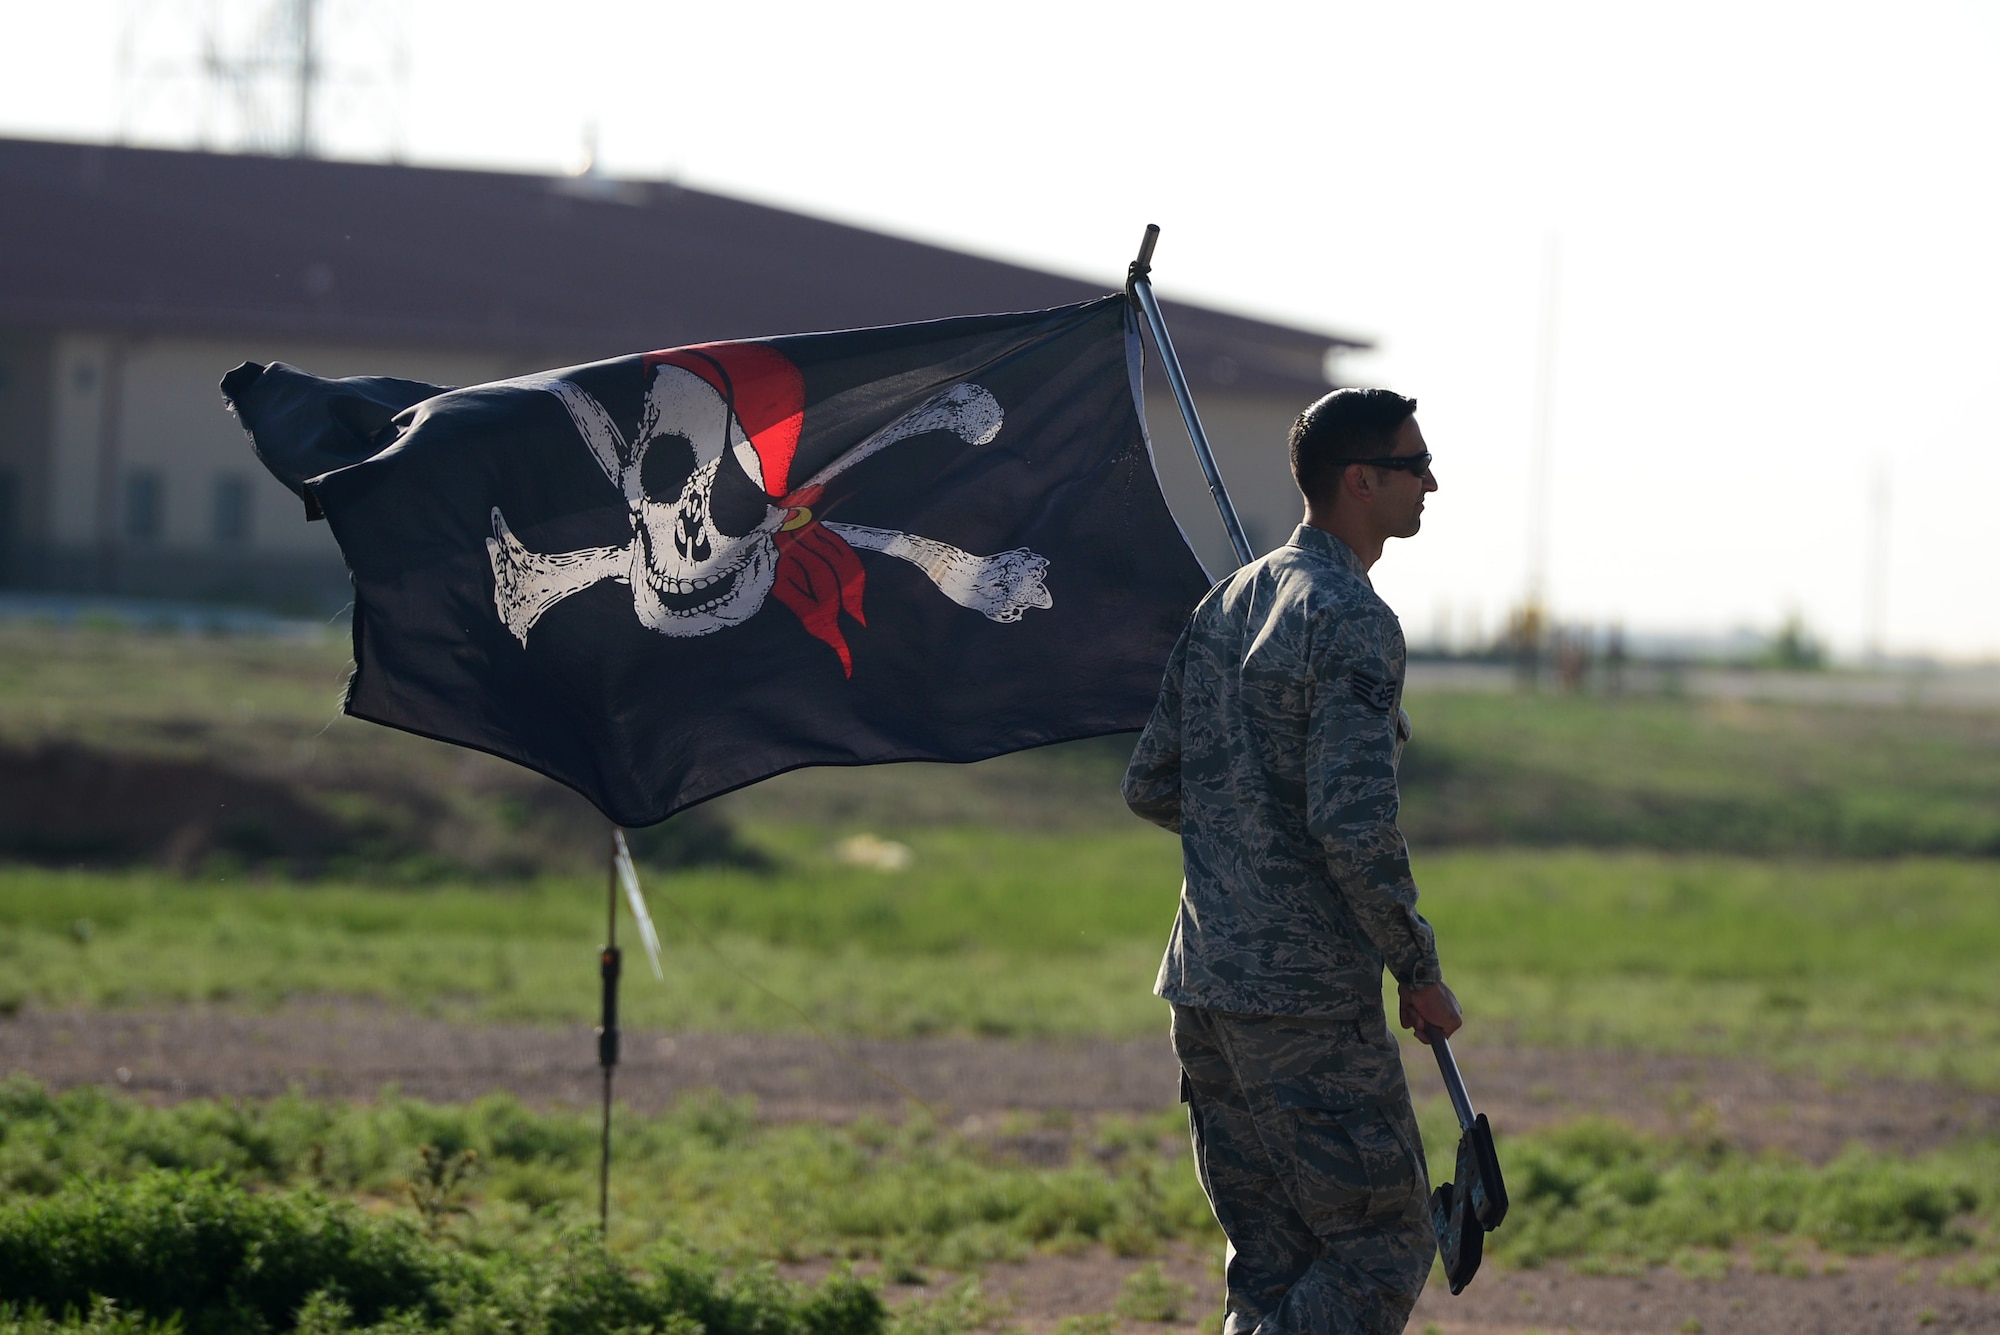 U.S. Air Force Staff Sgt. Samuel Pearson, 27th Special Operations Aircraft Maintenance Squadron maintenance training instructor, carries the “Jolly Roger” flag to the AC-130H Spectre gunship, nicknamed “Excalibur”, May 27, 2015 at Cannon Air Force Base, N.M. The “Jolly Roger” is a pirate flag flown to boost morale and was displayed during the final Spectre gunship deployment. (U.S. Air Force photo/Senior Airman Eboni Reece)